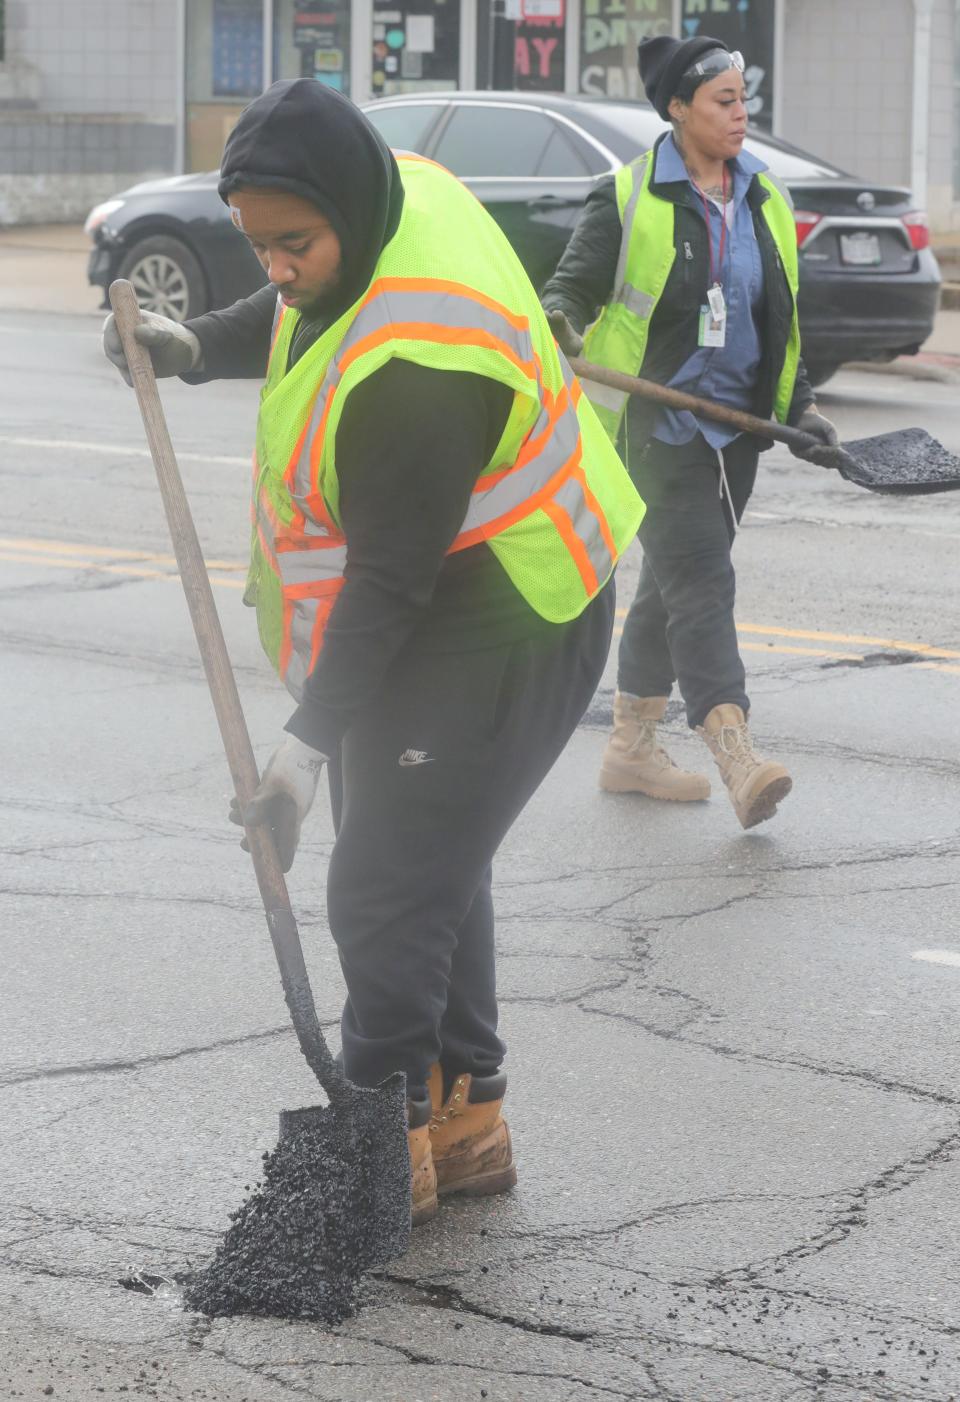 City of Akron highway maintenance workers Amos Johnson and Shay Carter fill potholes on East Exchange Street in Akron.